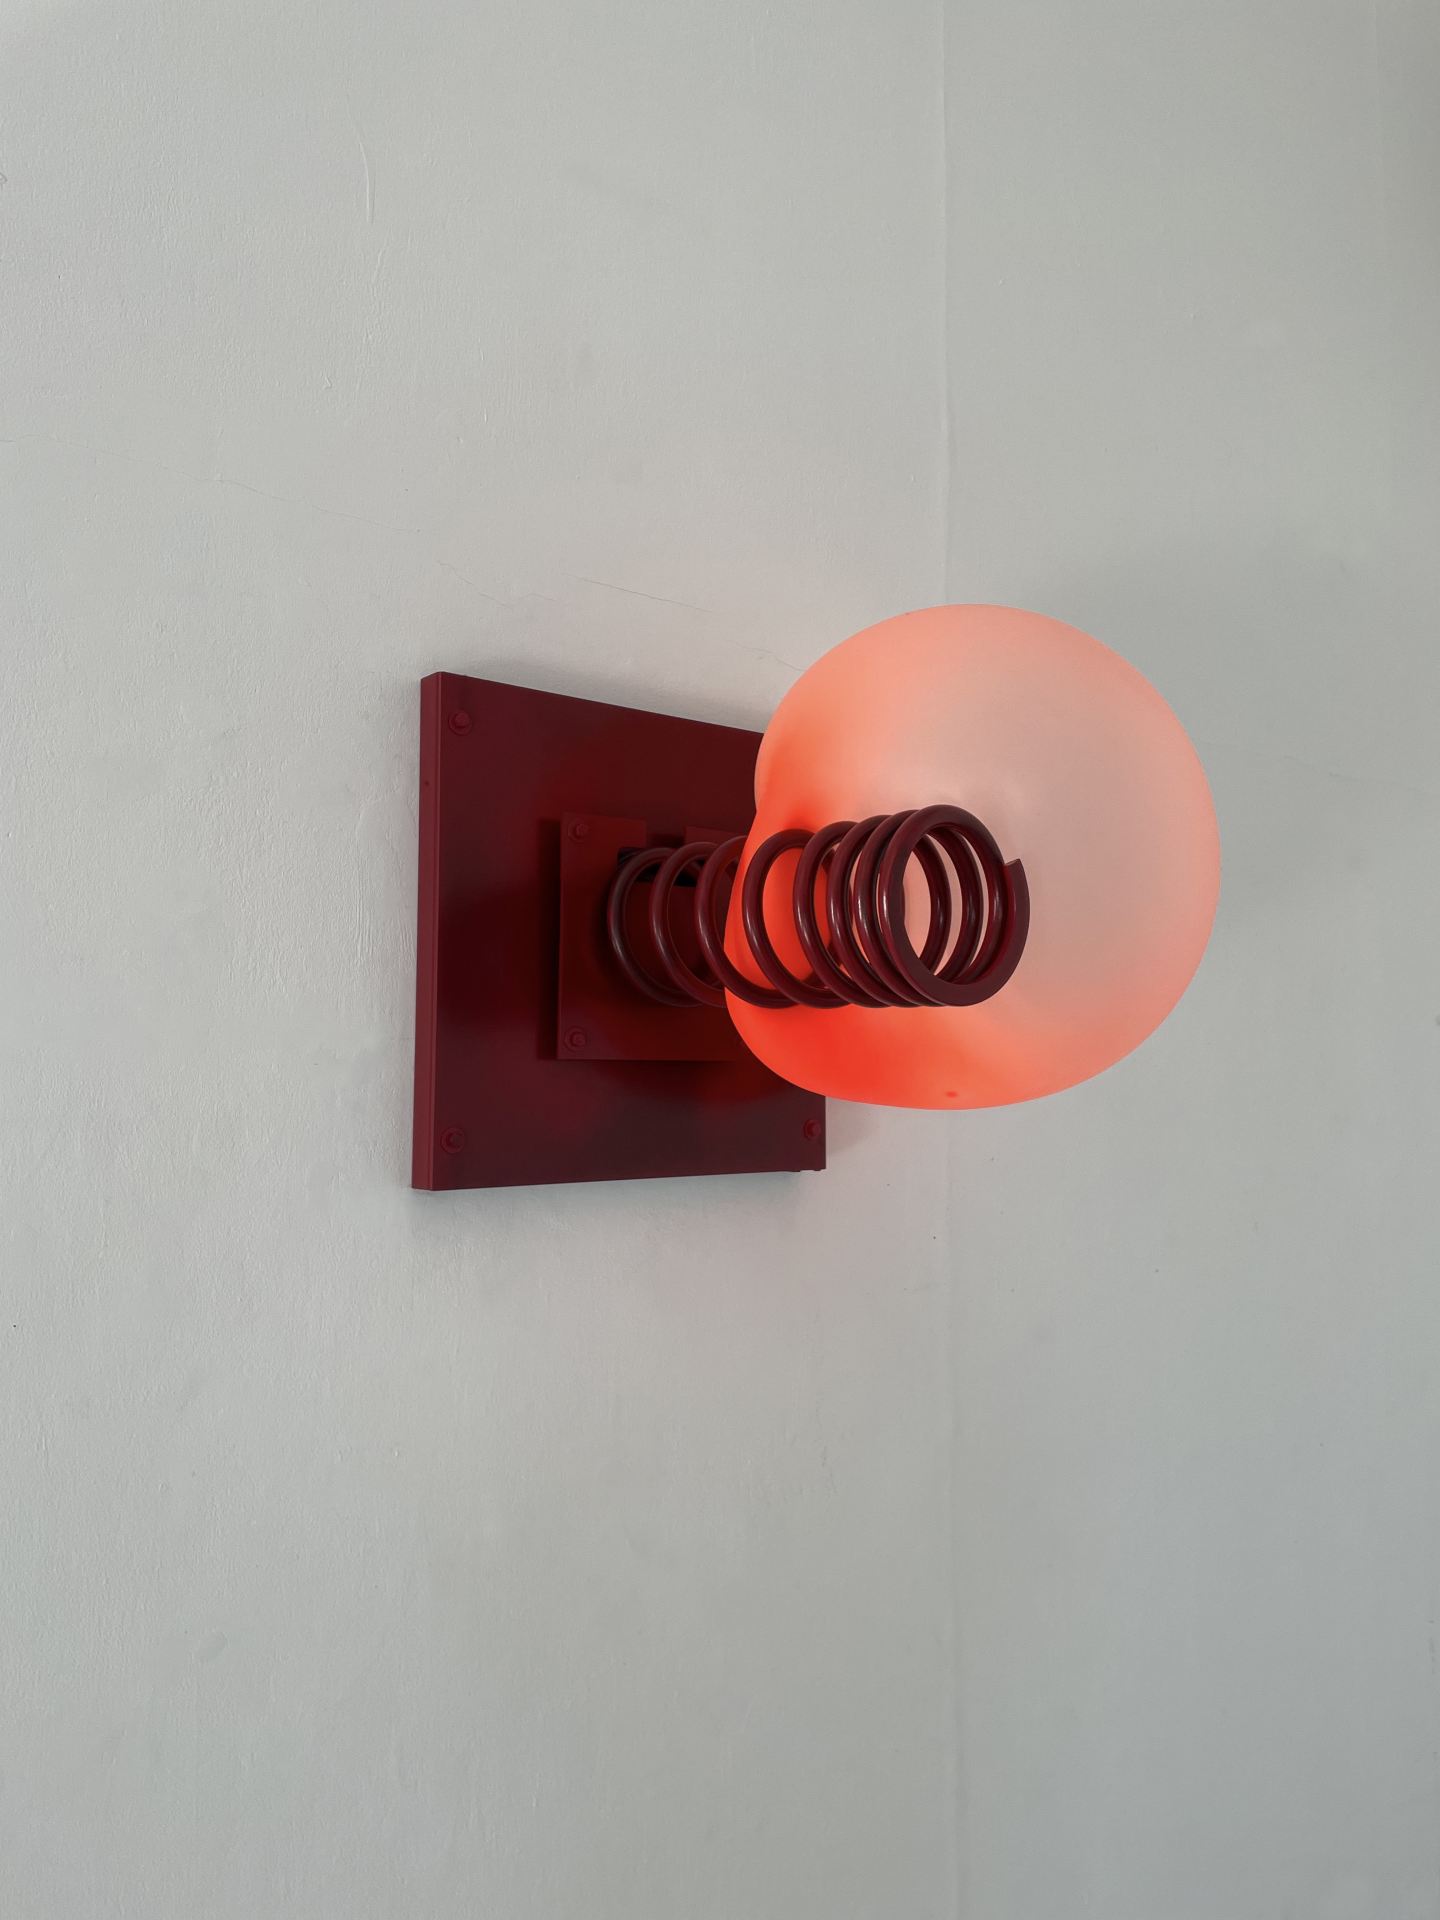 A sculpture comprised of a red spring hanging from a red square - pinching a fleshy circle - hangs from a white wall.